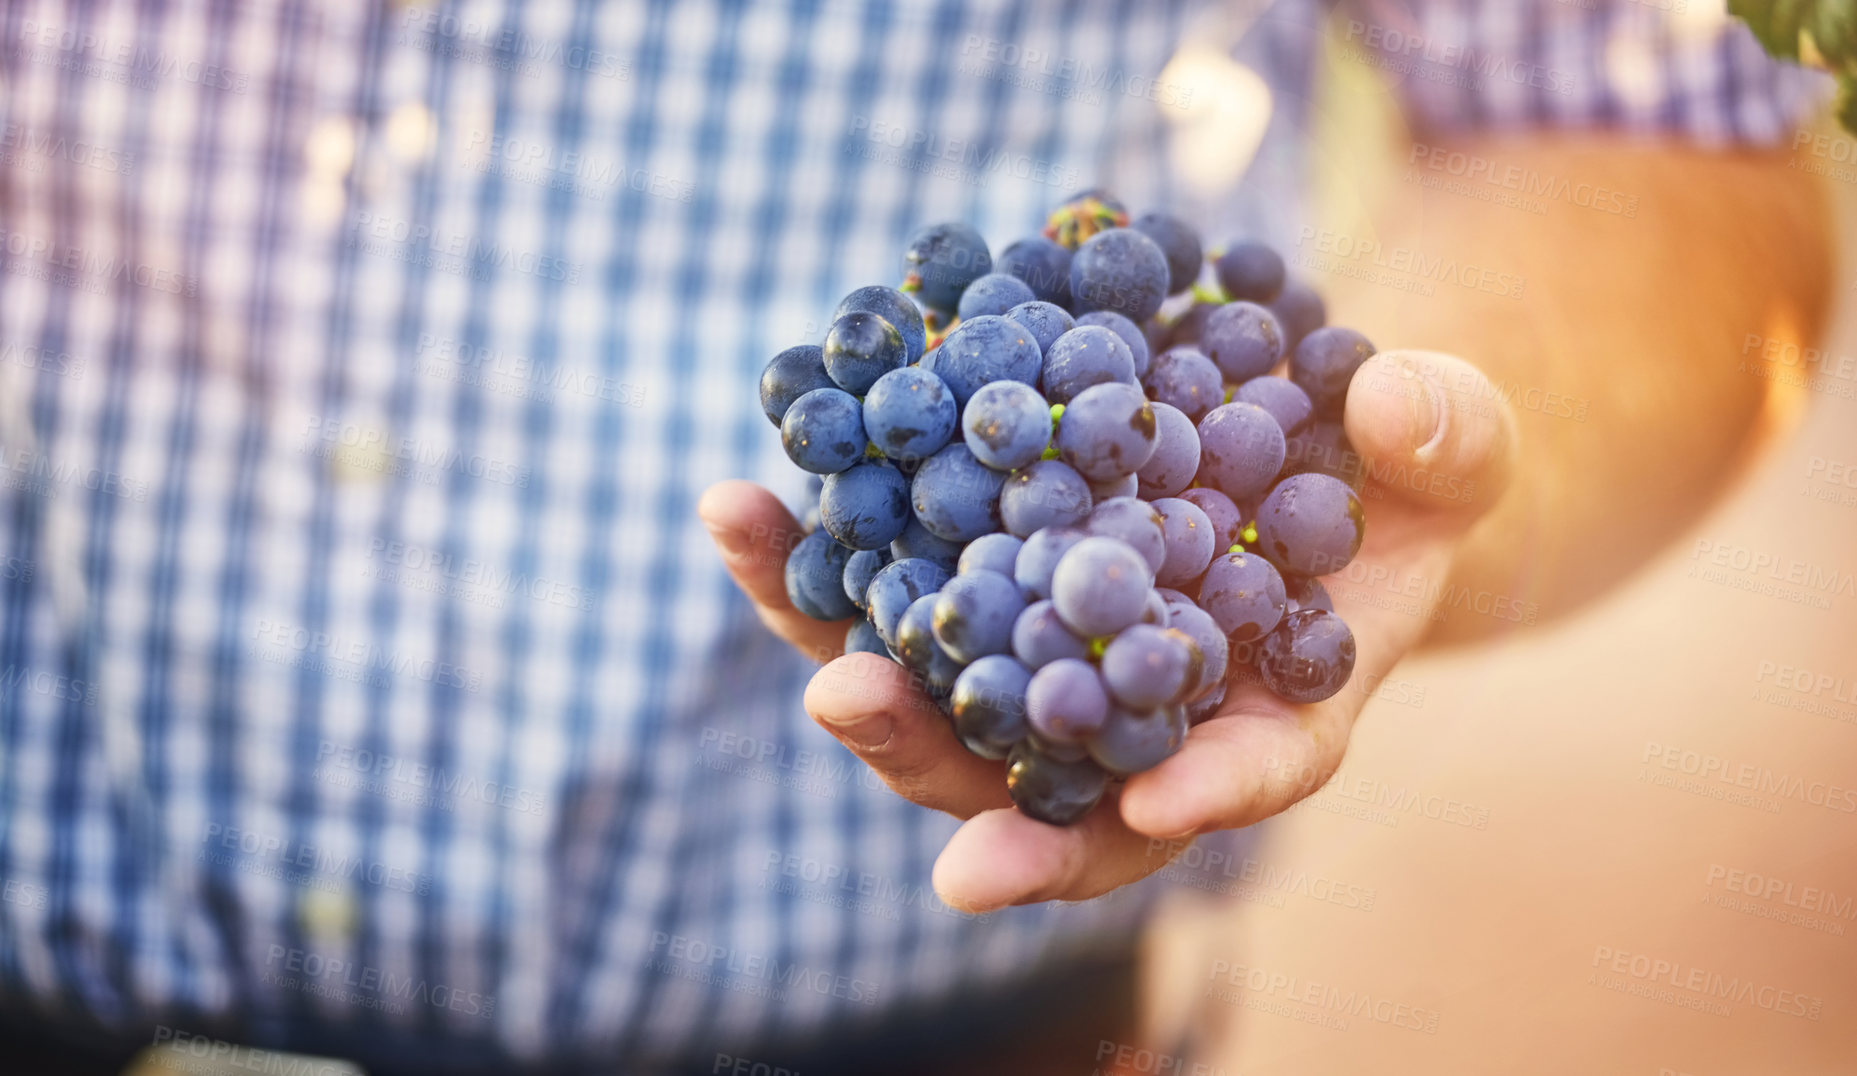 Buy stock photo Harvest, grapes and hands of winemaker in outdoor for vineyard, growth or agriculture in countryside. Lens flare, fruit and man with produce for wine making, viticulture or farming in Napa Valley